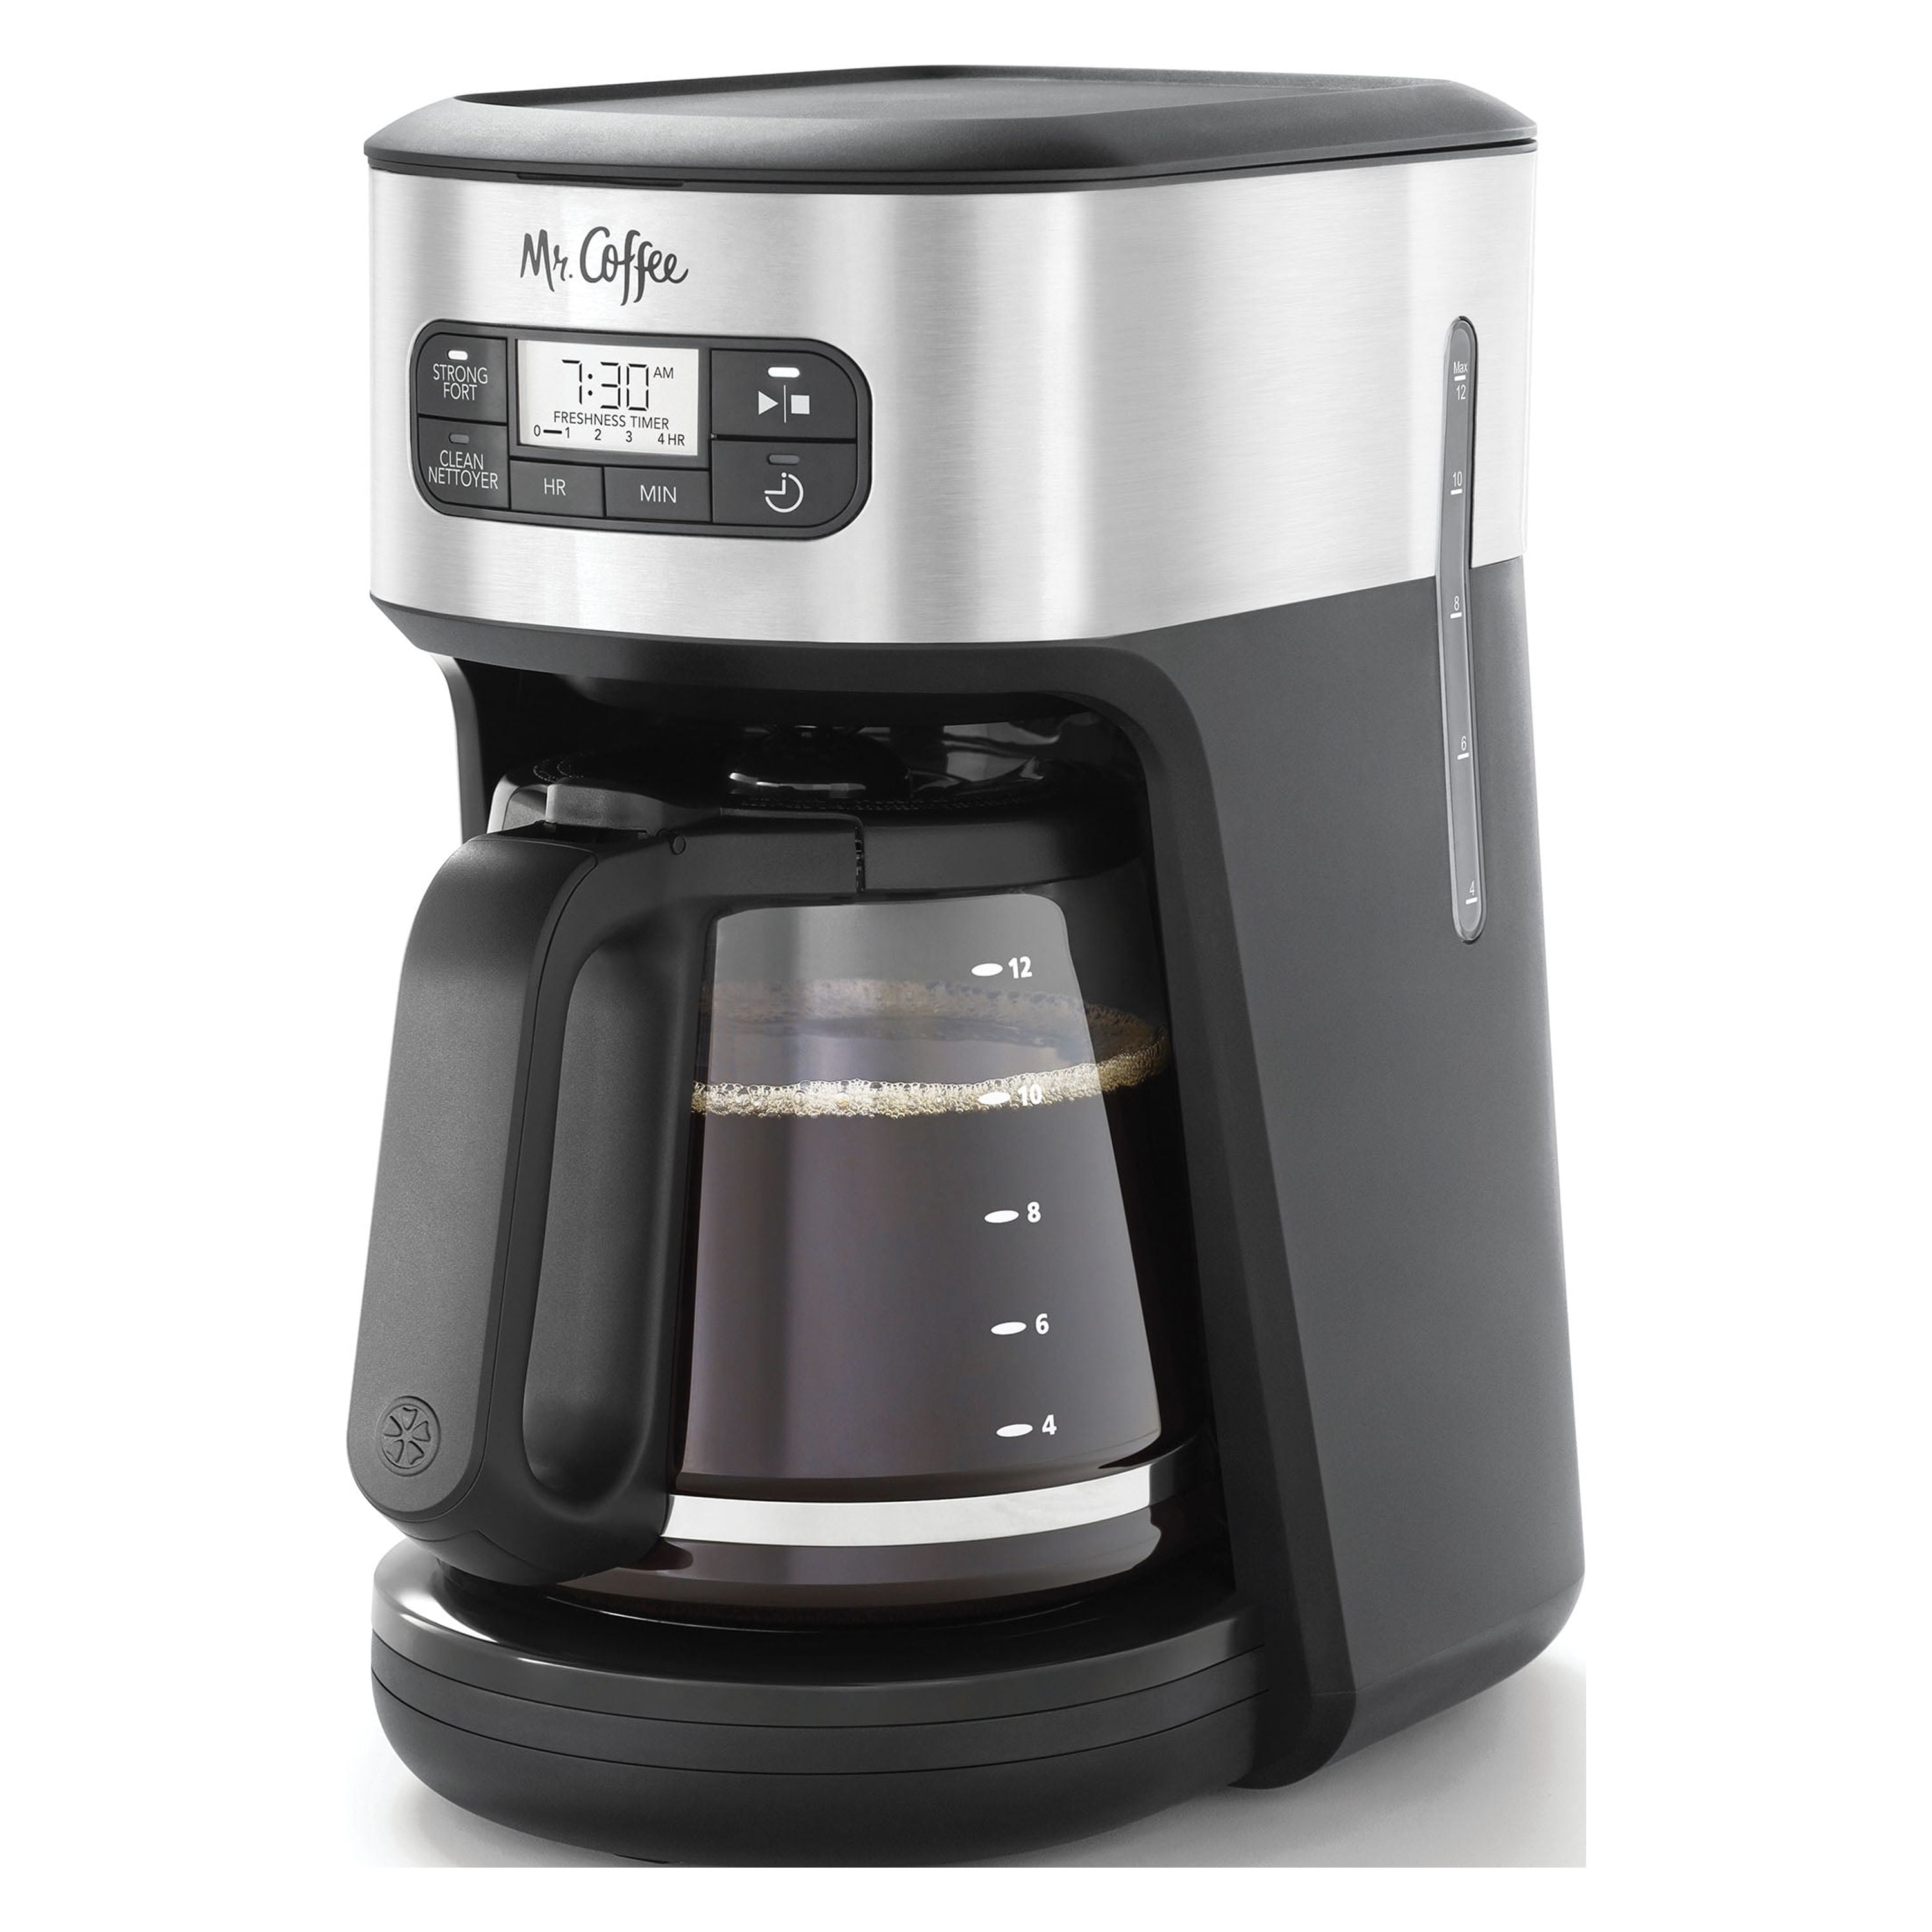 Mr. Coffee 12-Cup Coffee Maker Grab-a-Cup Auto Pause Easy Cleanup